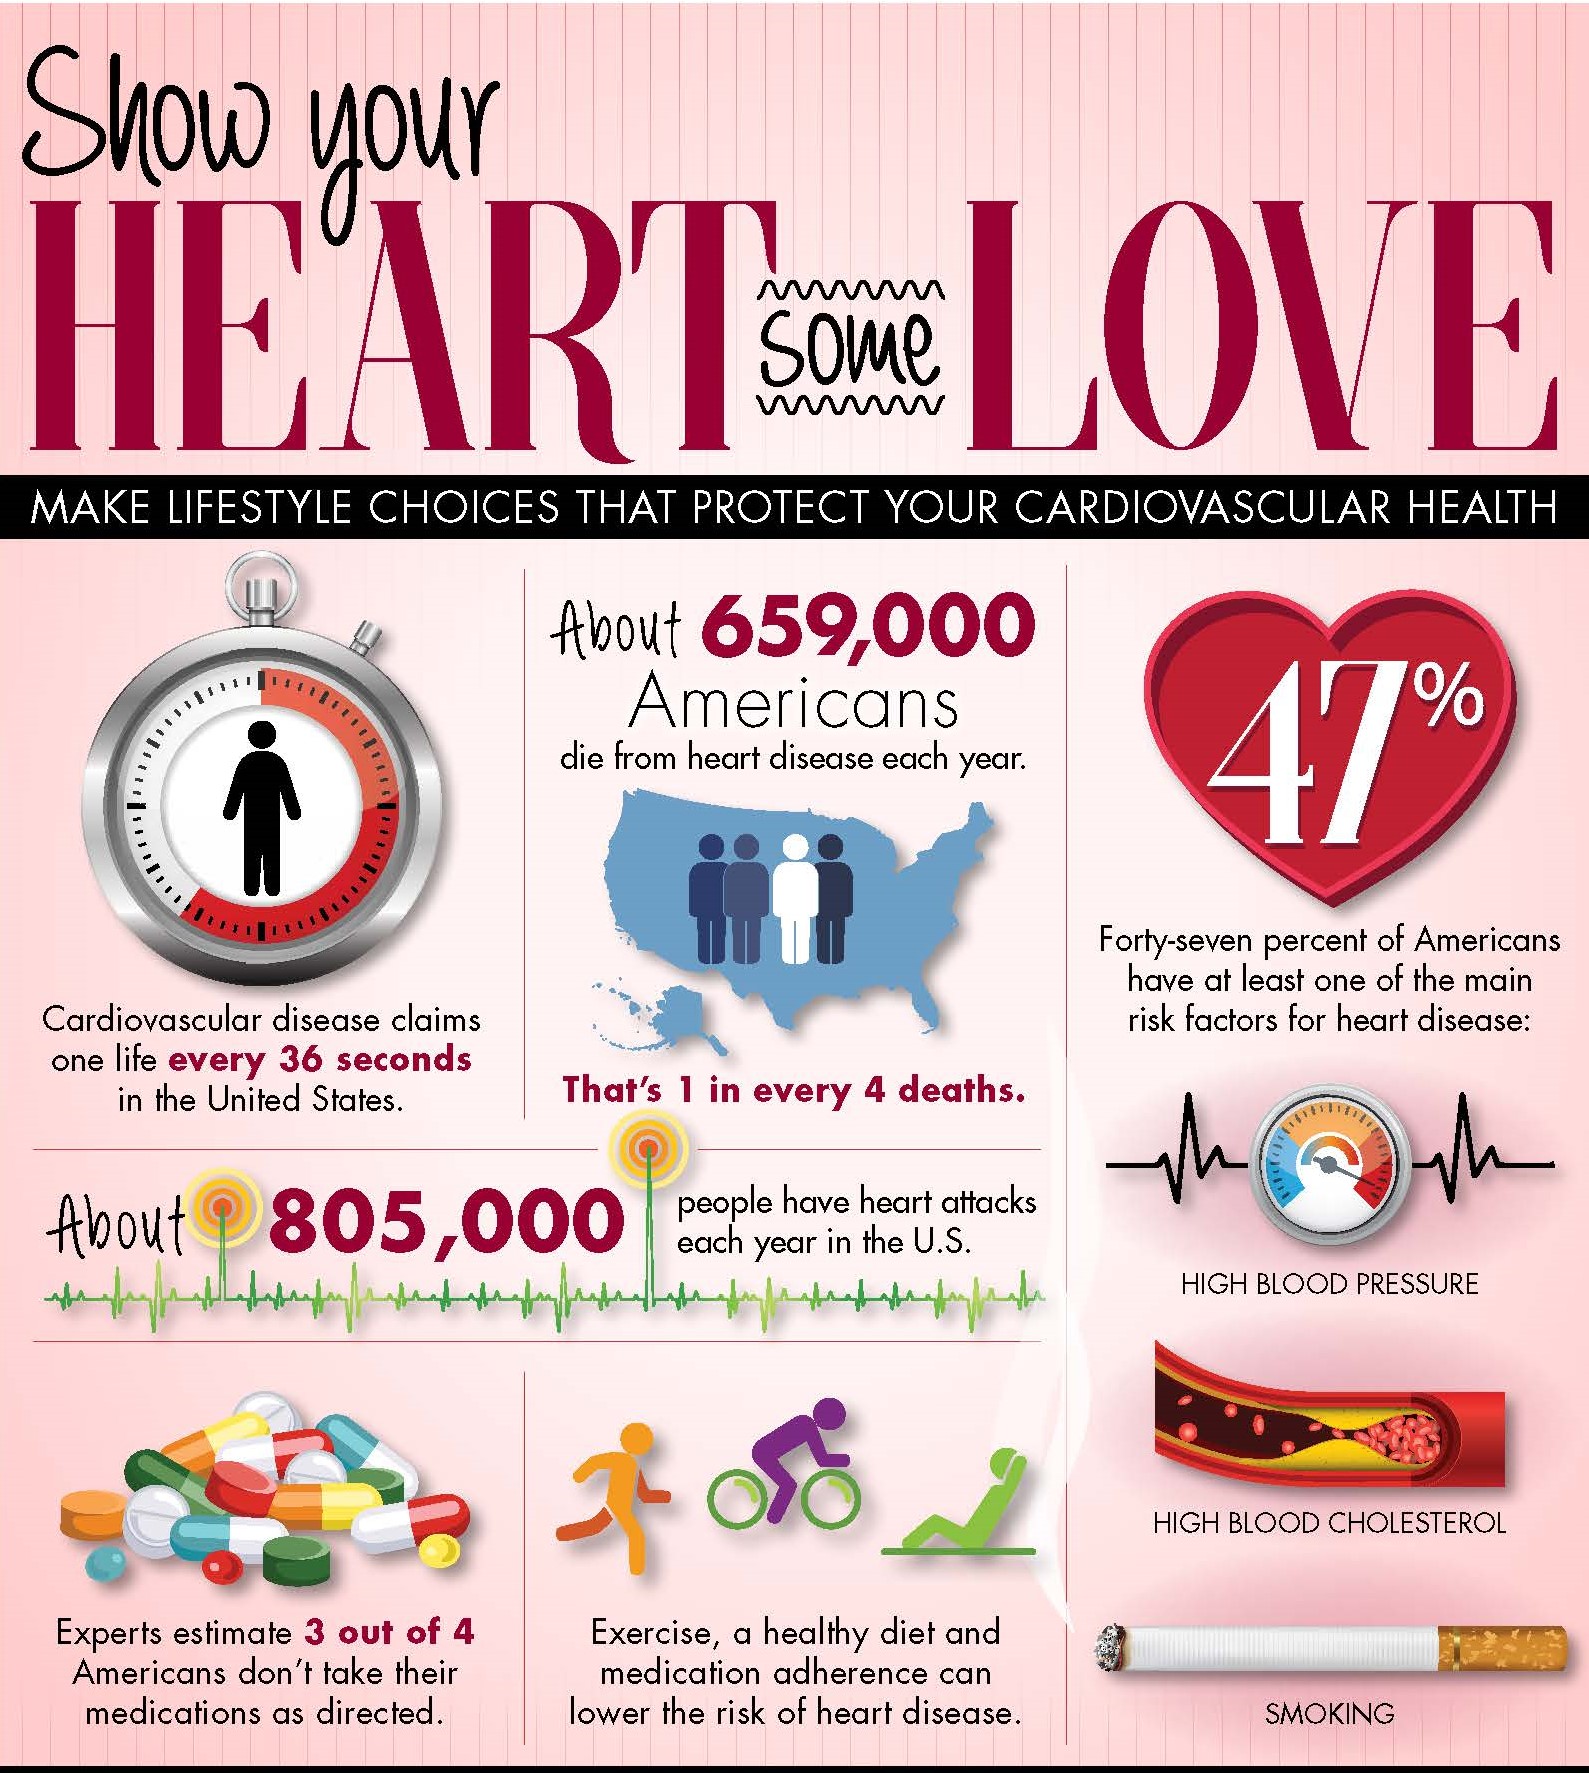 Make lifestyle choices that protect your cardiovascular health